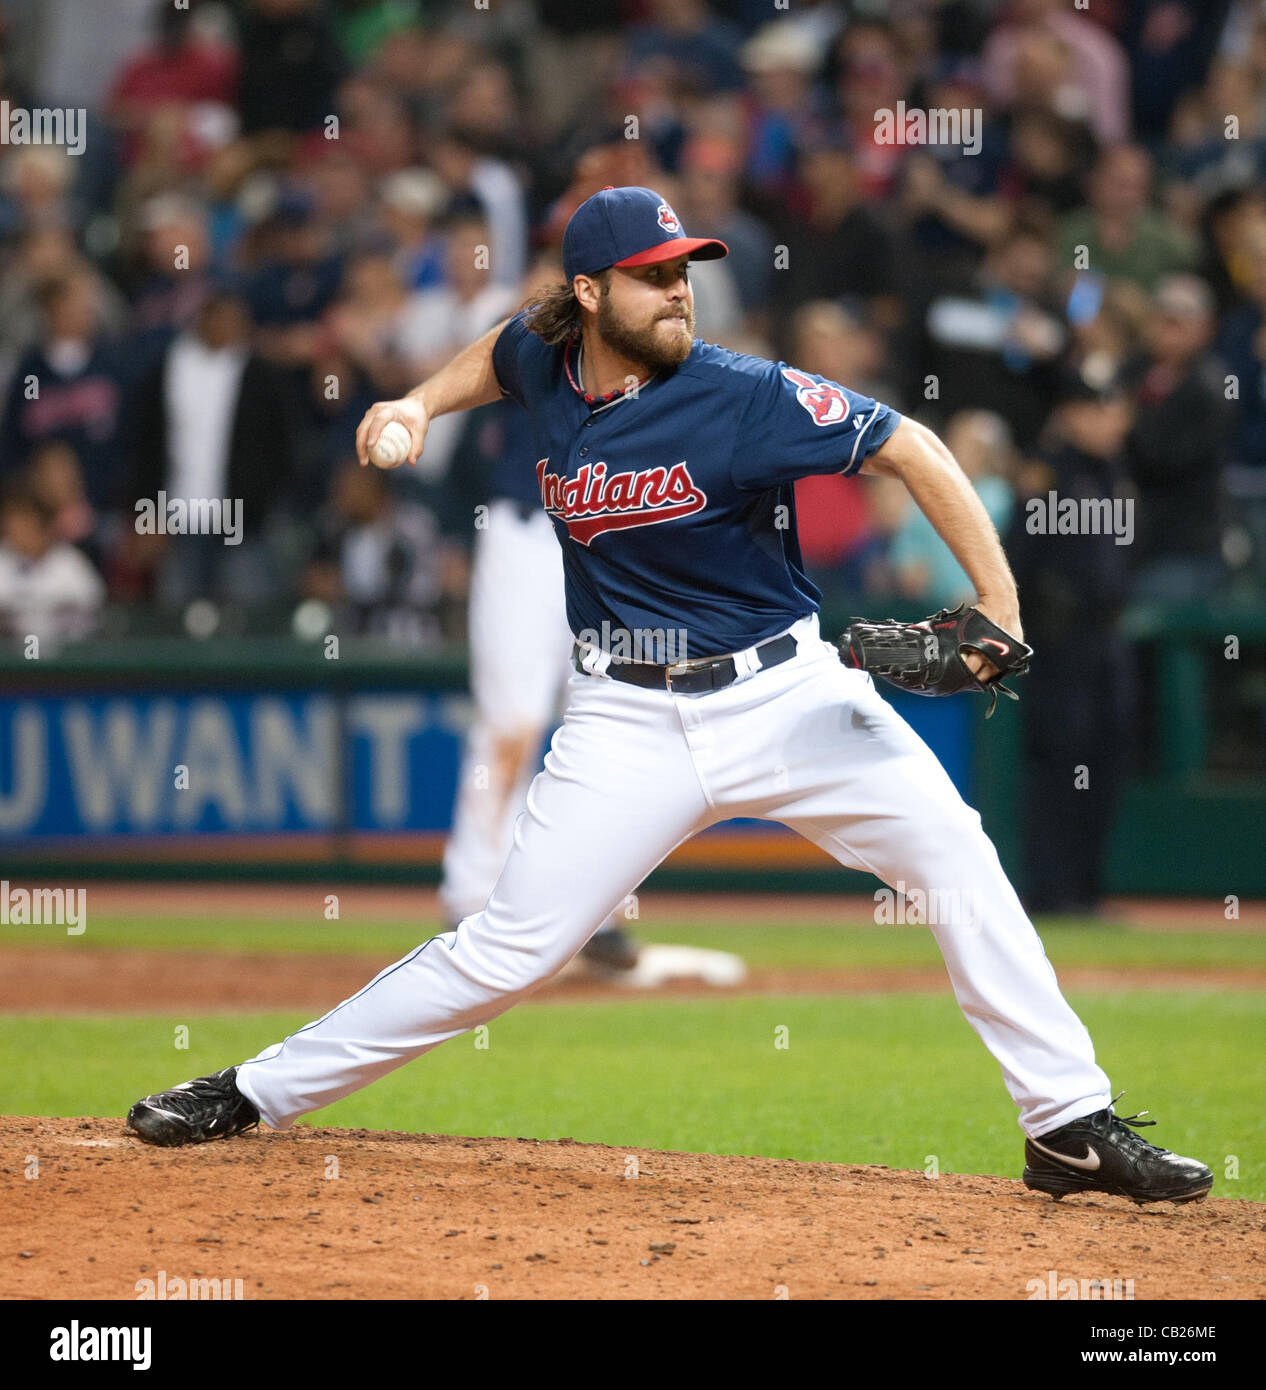 Cleveland Oh Usa May 22 Cleveland Indians Relief Pitcher Chris Perez 54 Pitches During The